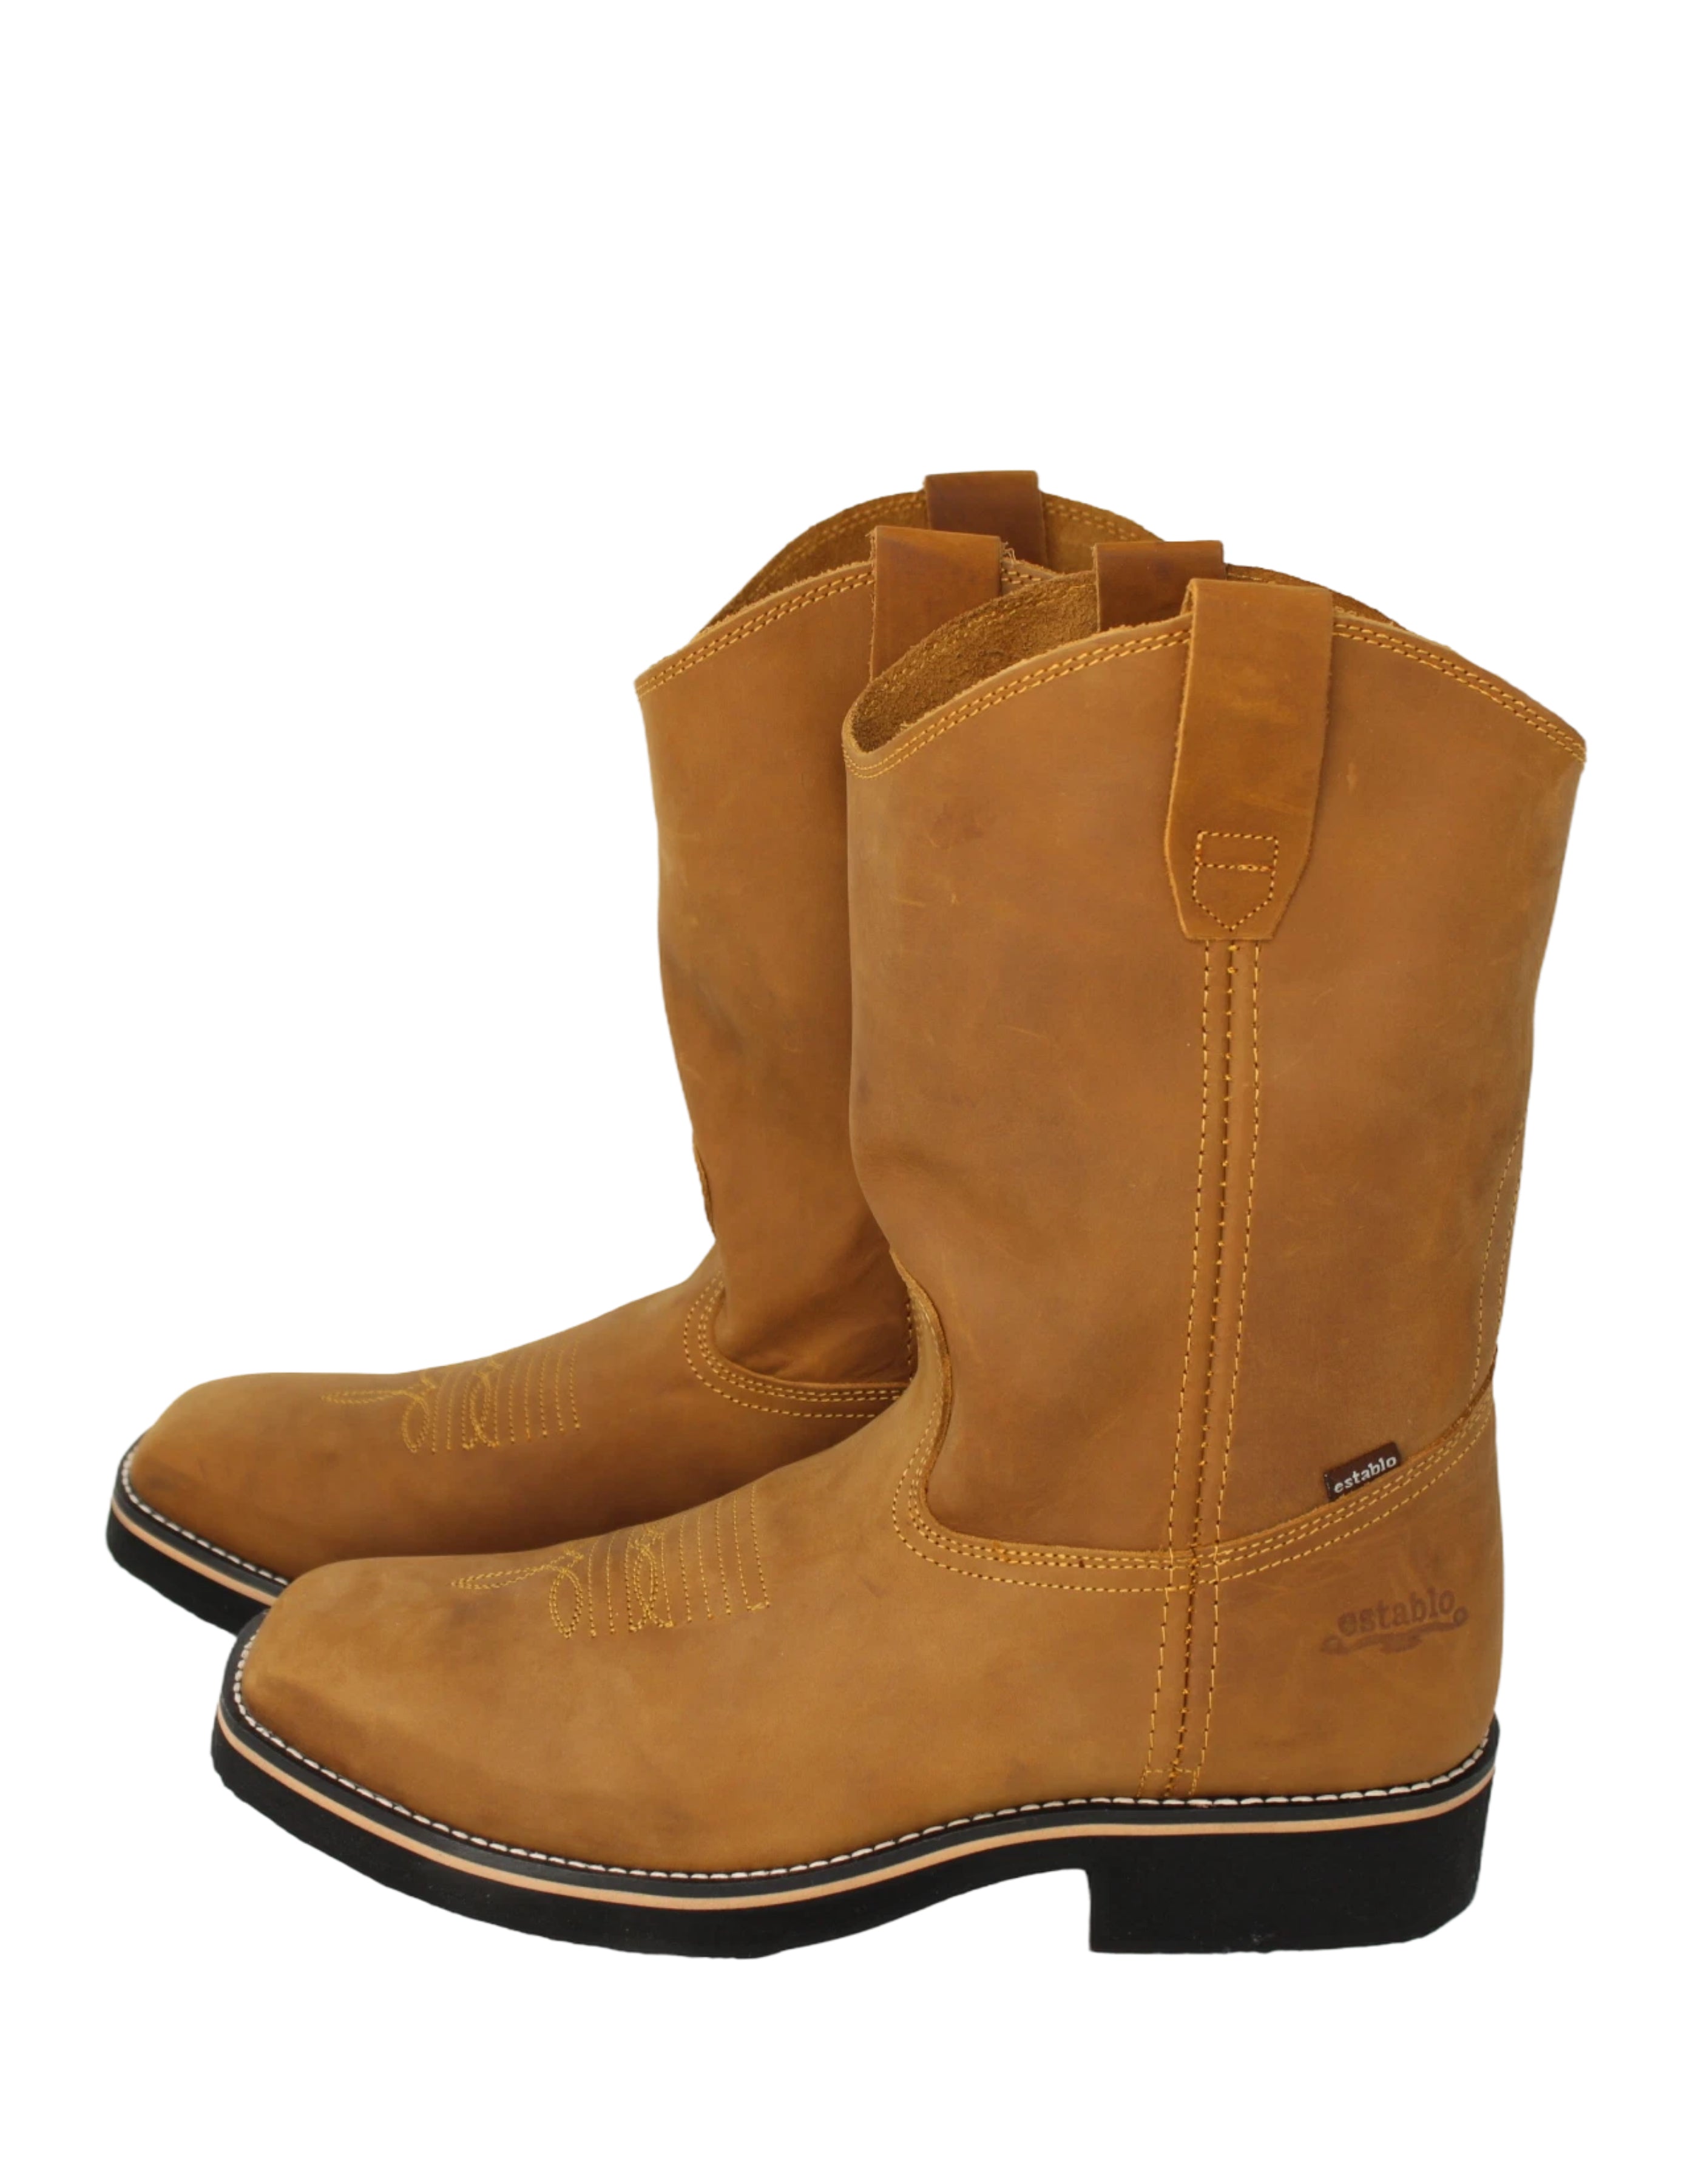 Charles Leather Work Boot (2 colors)